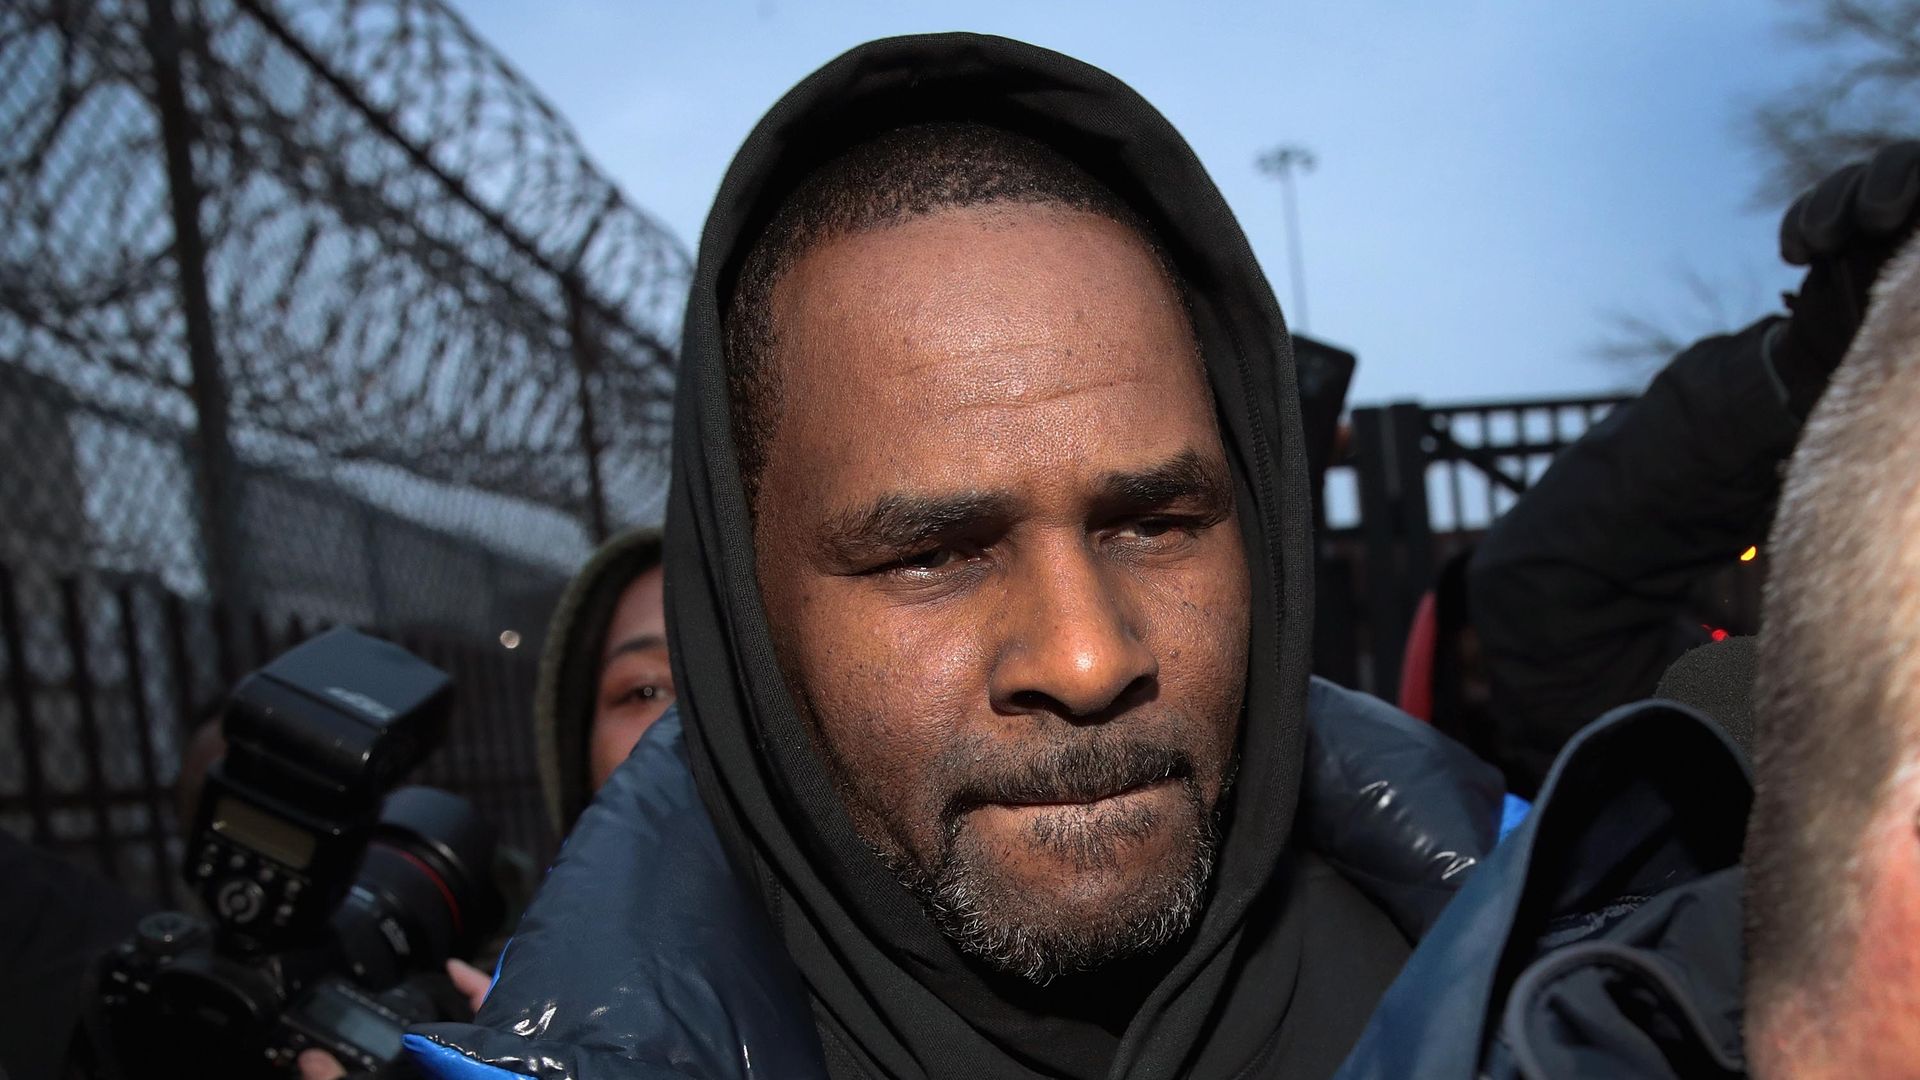 R. Kelly says the sexual abuse allegations are lies.